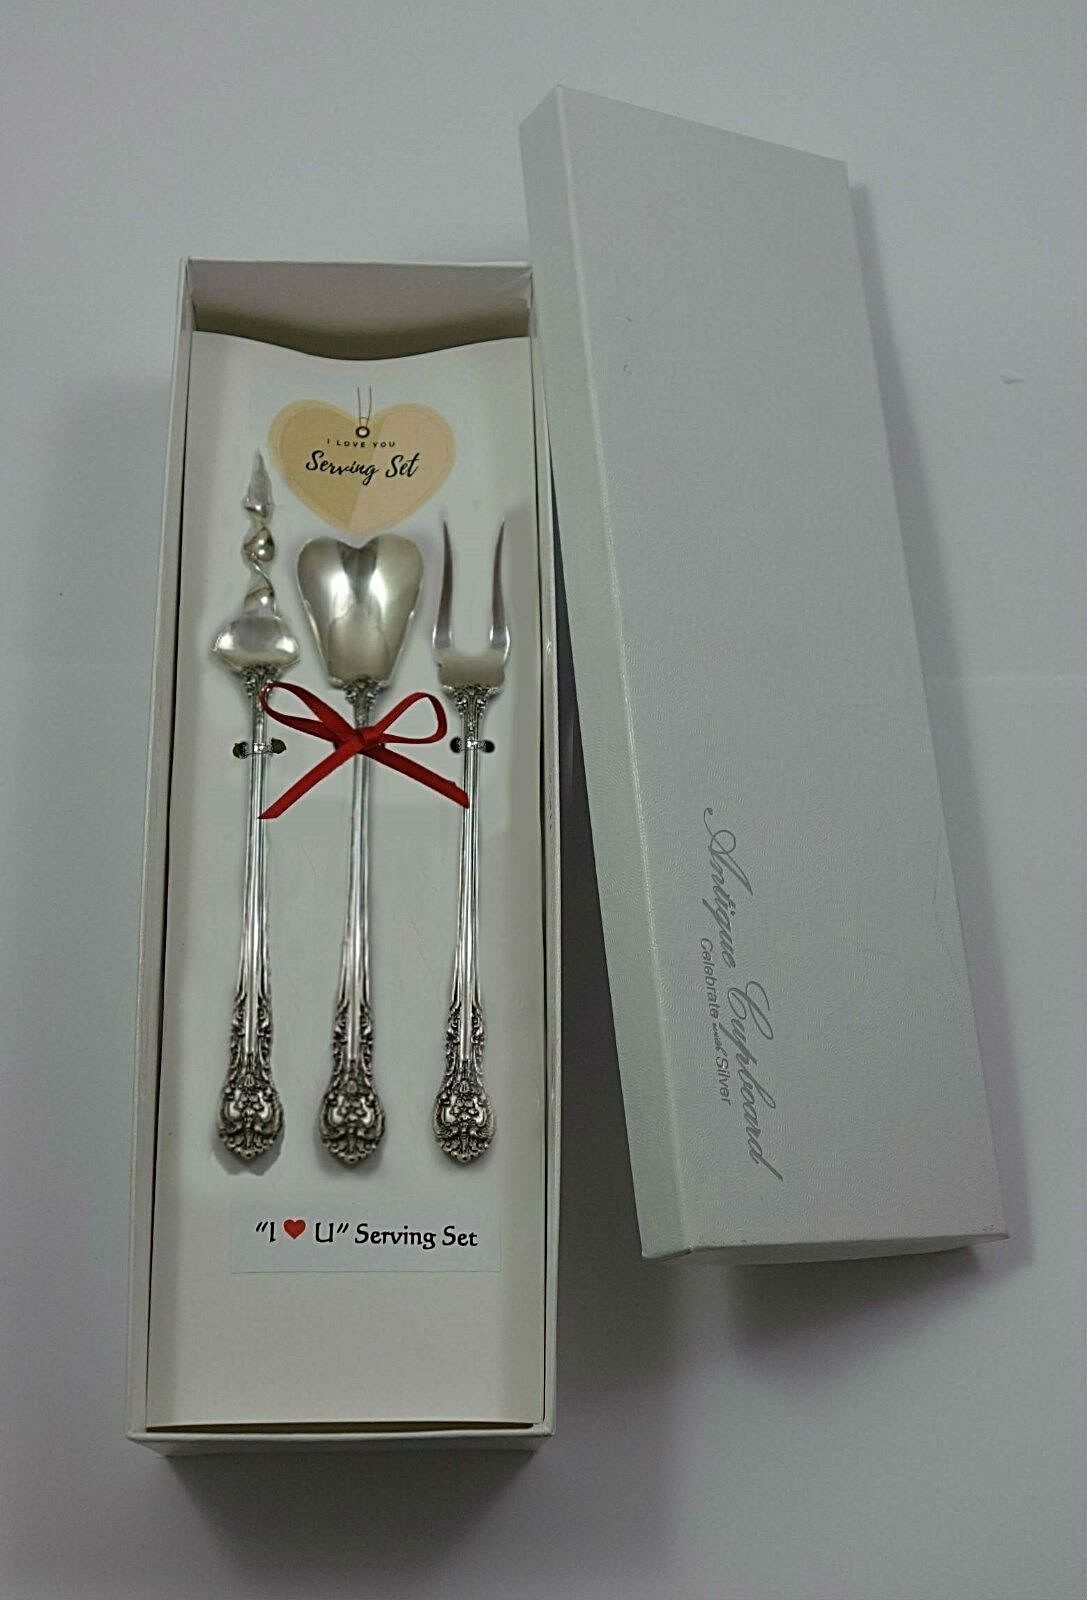 Primary image for King Edward by Gorham Sterling Silver "I Love You" Serving Set 3pc Custom Gift